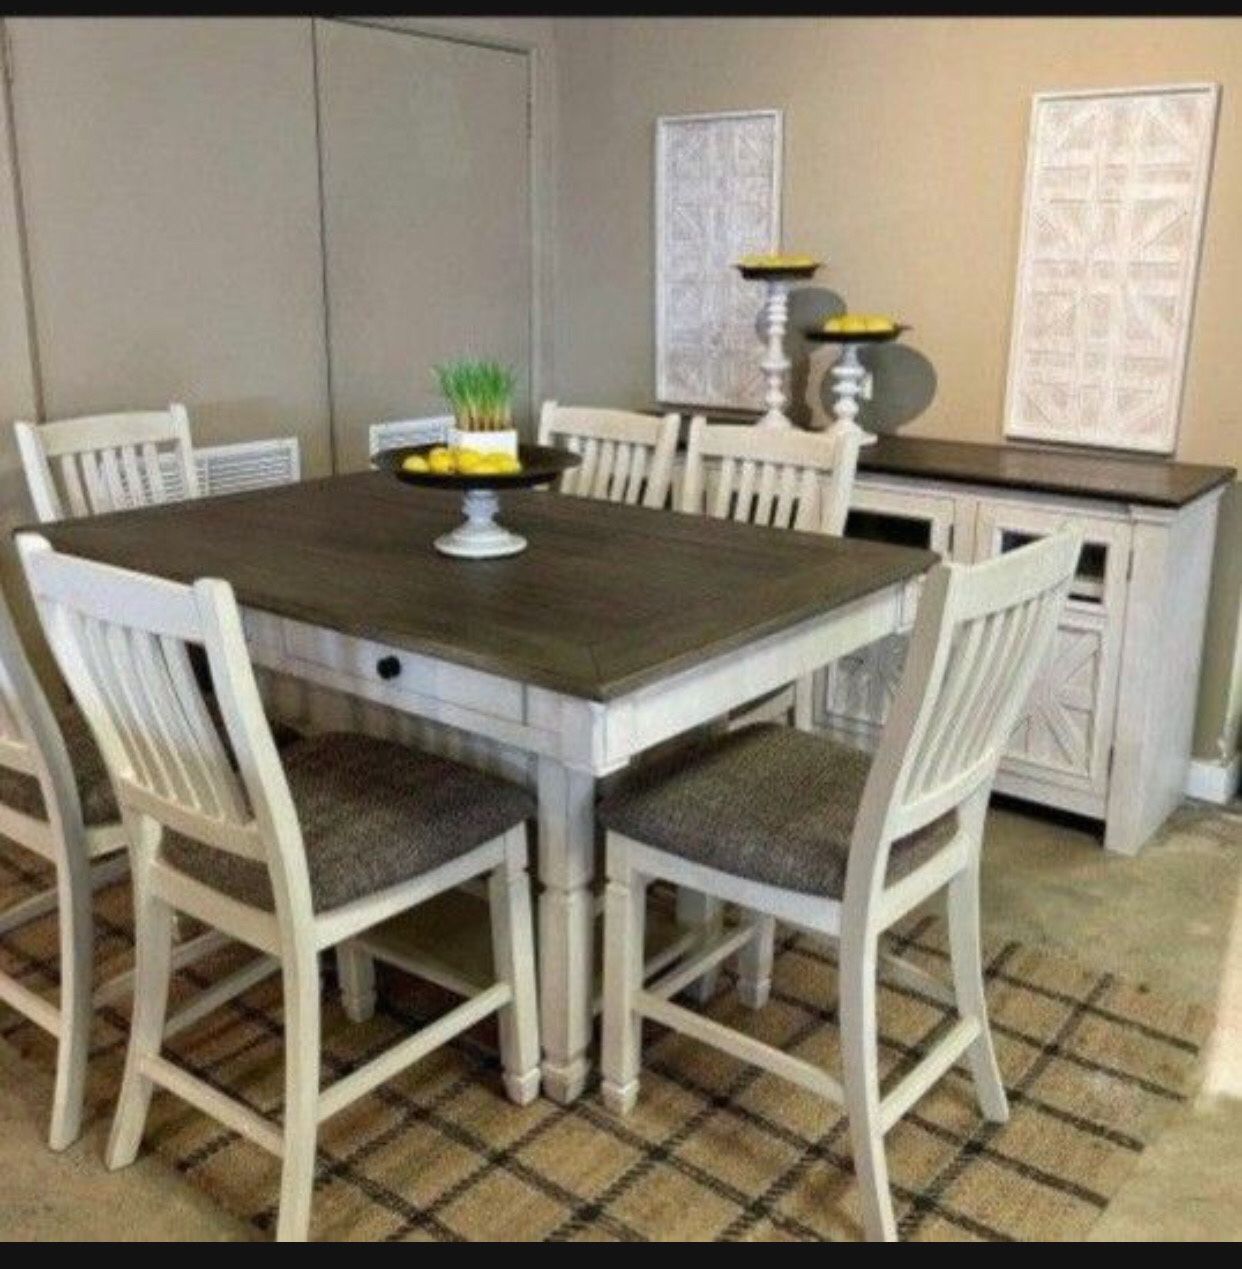 Counter Height Dining Table And 4 Bar Stools Whitewashed Bolanburg By Ashley 🥂 New Brand 👌 Kitchen/ Dining Room ✅